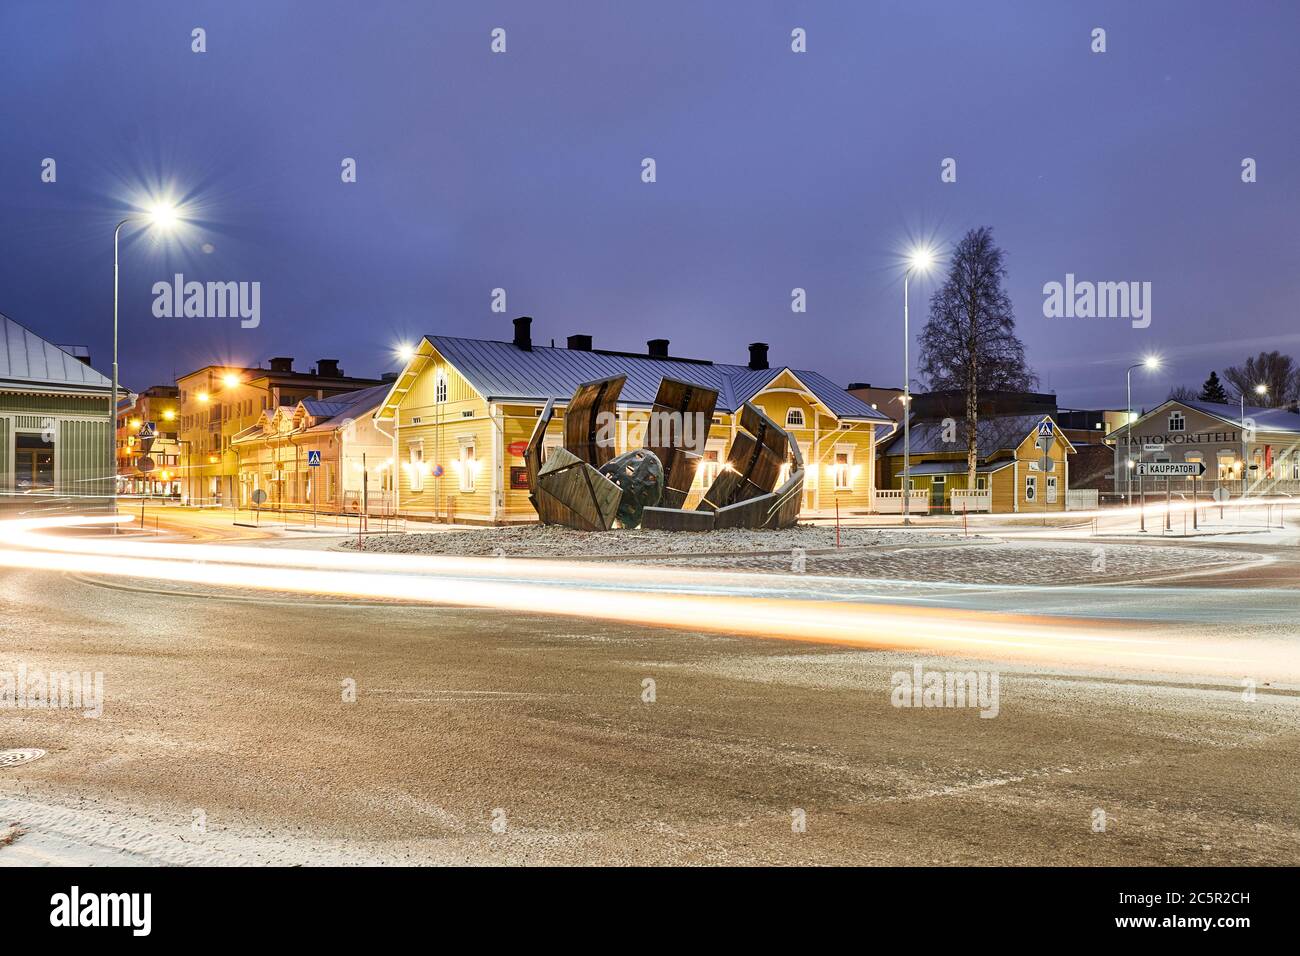 Joensuu, Finland - November 23, 2018: The new roundabout at night with light trails. In the center of the intersection is a modern art object. Old Eur Stock Photo